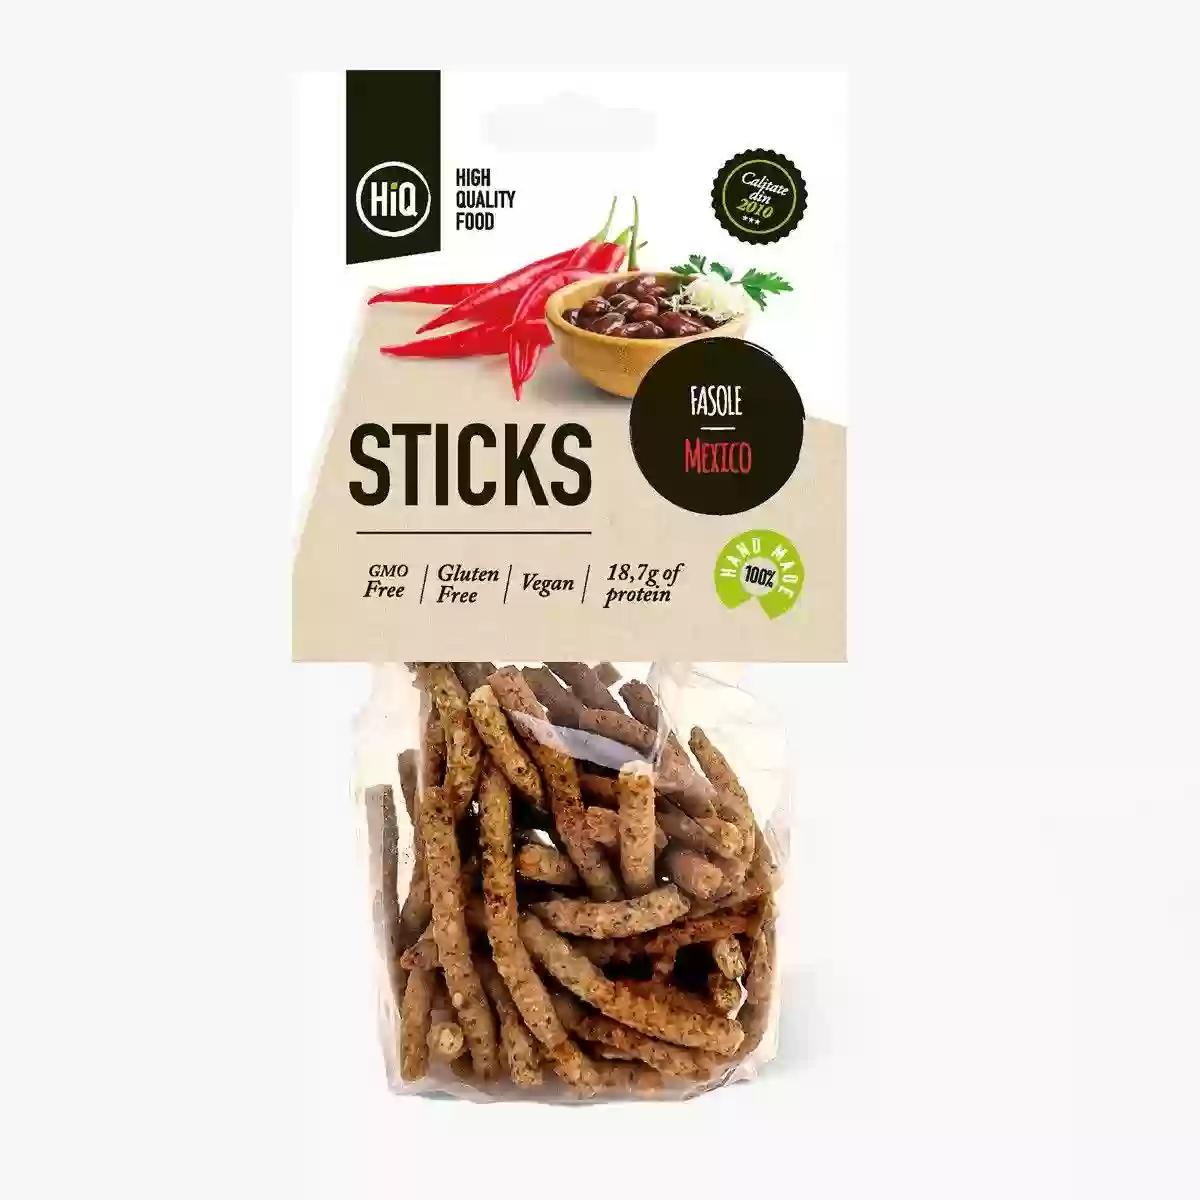 Sticks fasole mexico proteic vegan 70g, yes chips